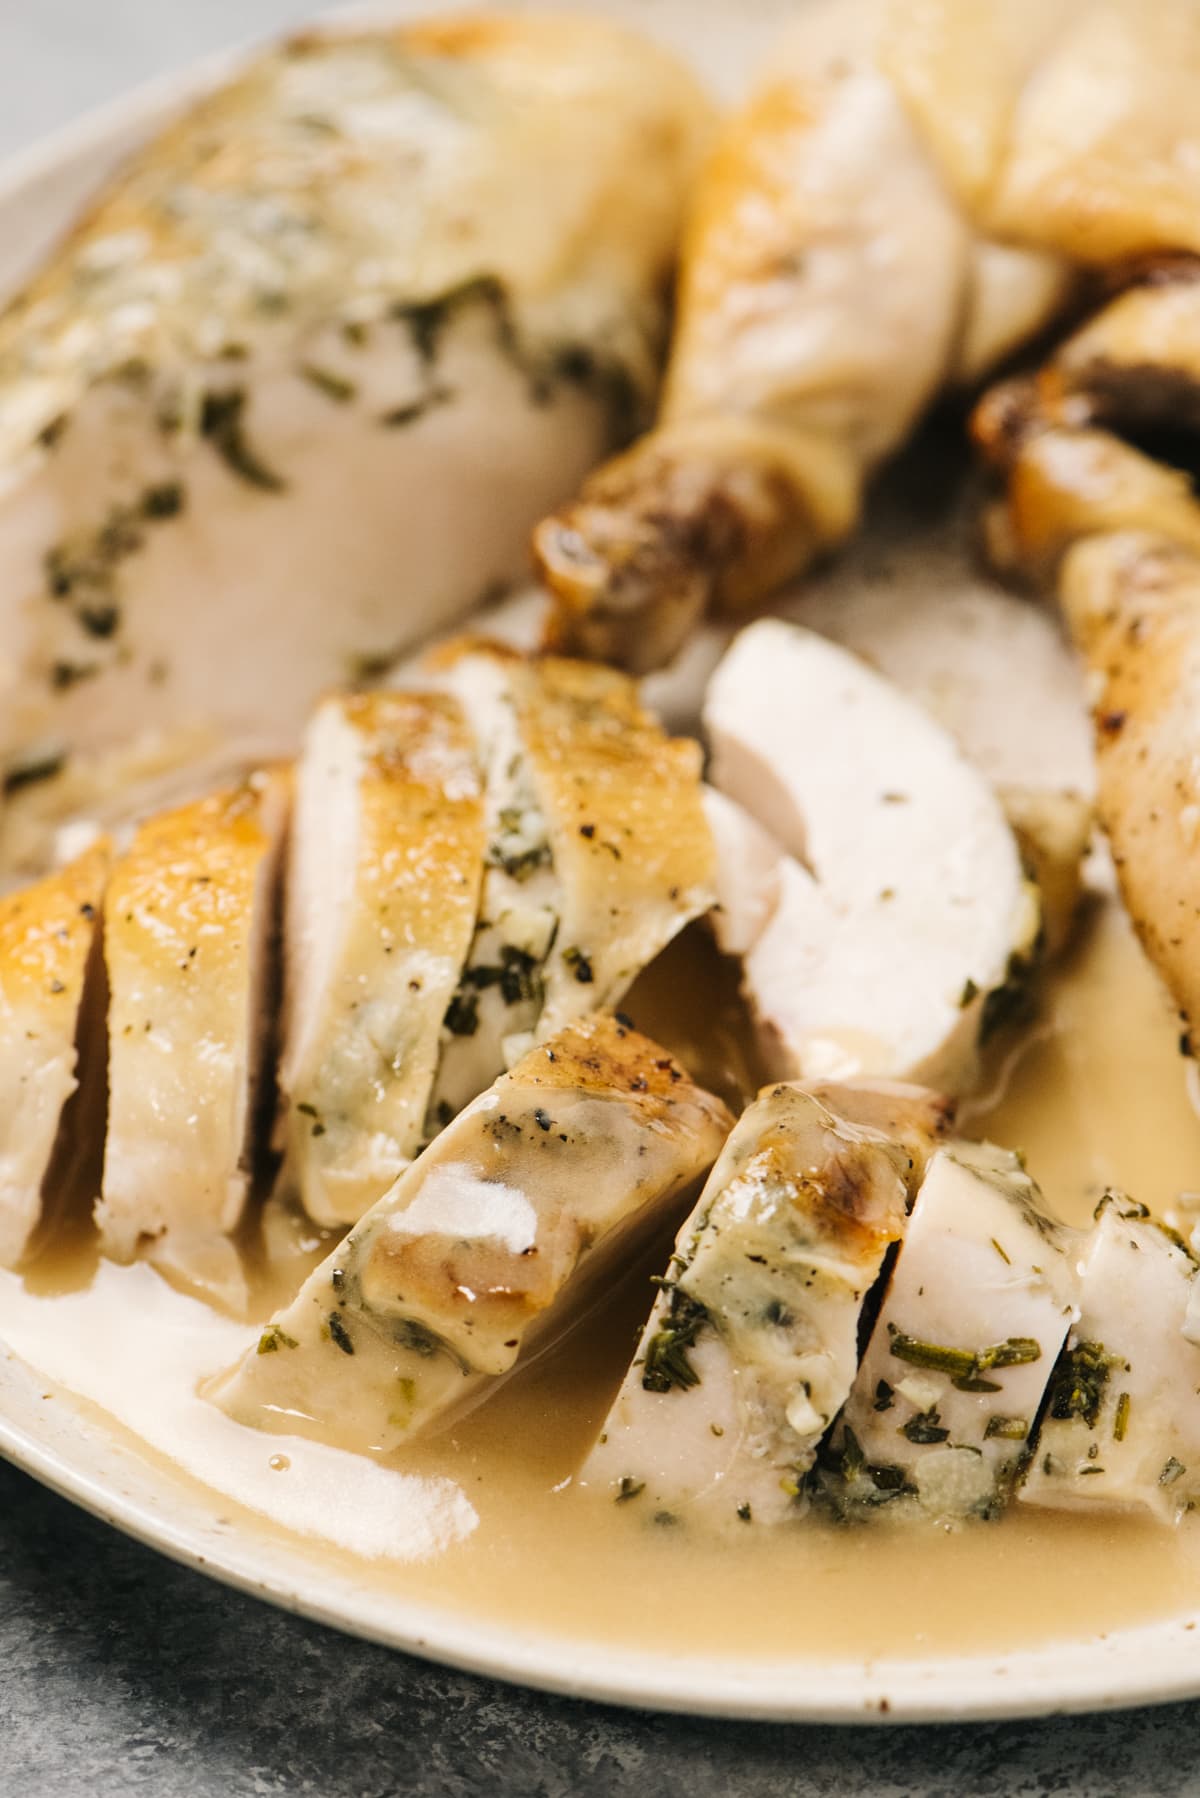 Slow cooker chicken divided into slices and smothered with gravy on a tan speckled serving platter.